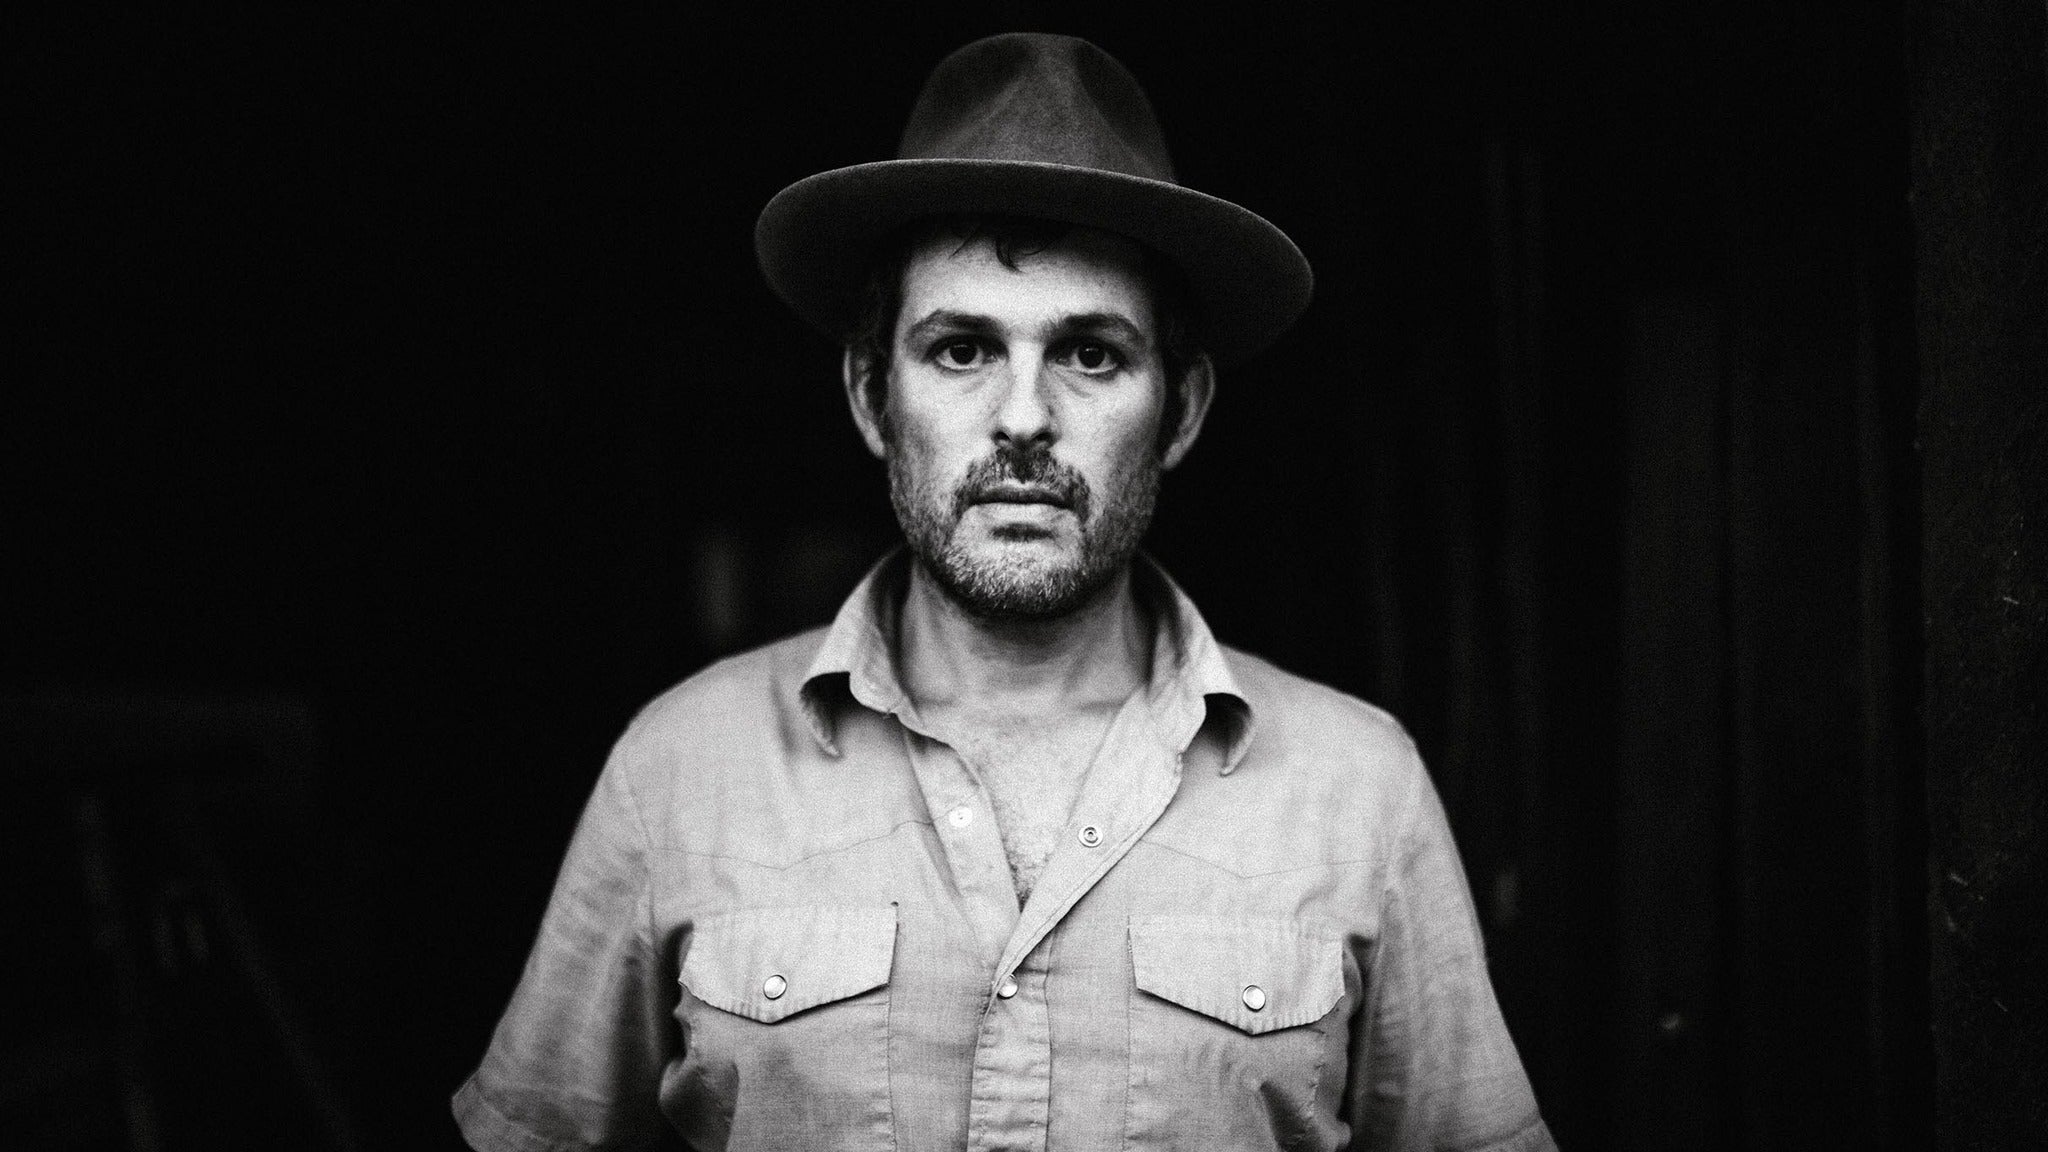 Gregory Alan Isakov with special guest Shovels & Rope